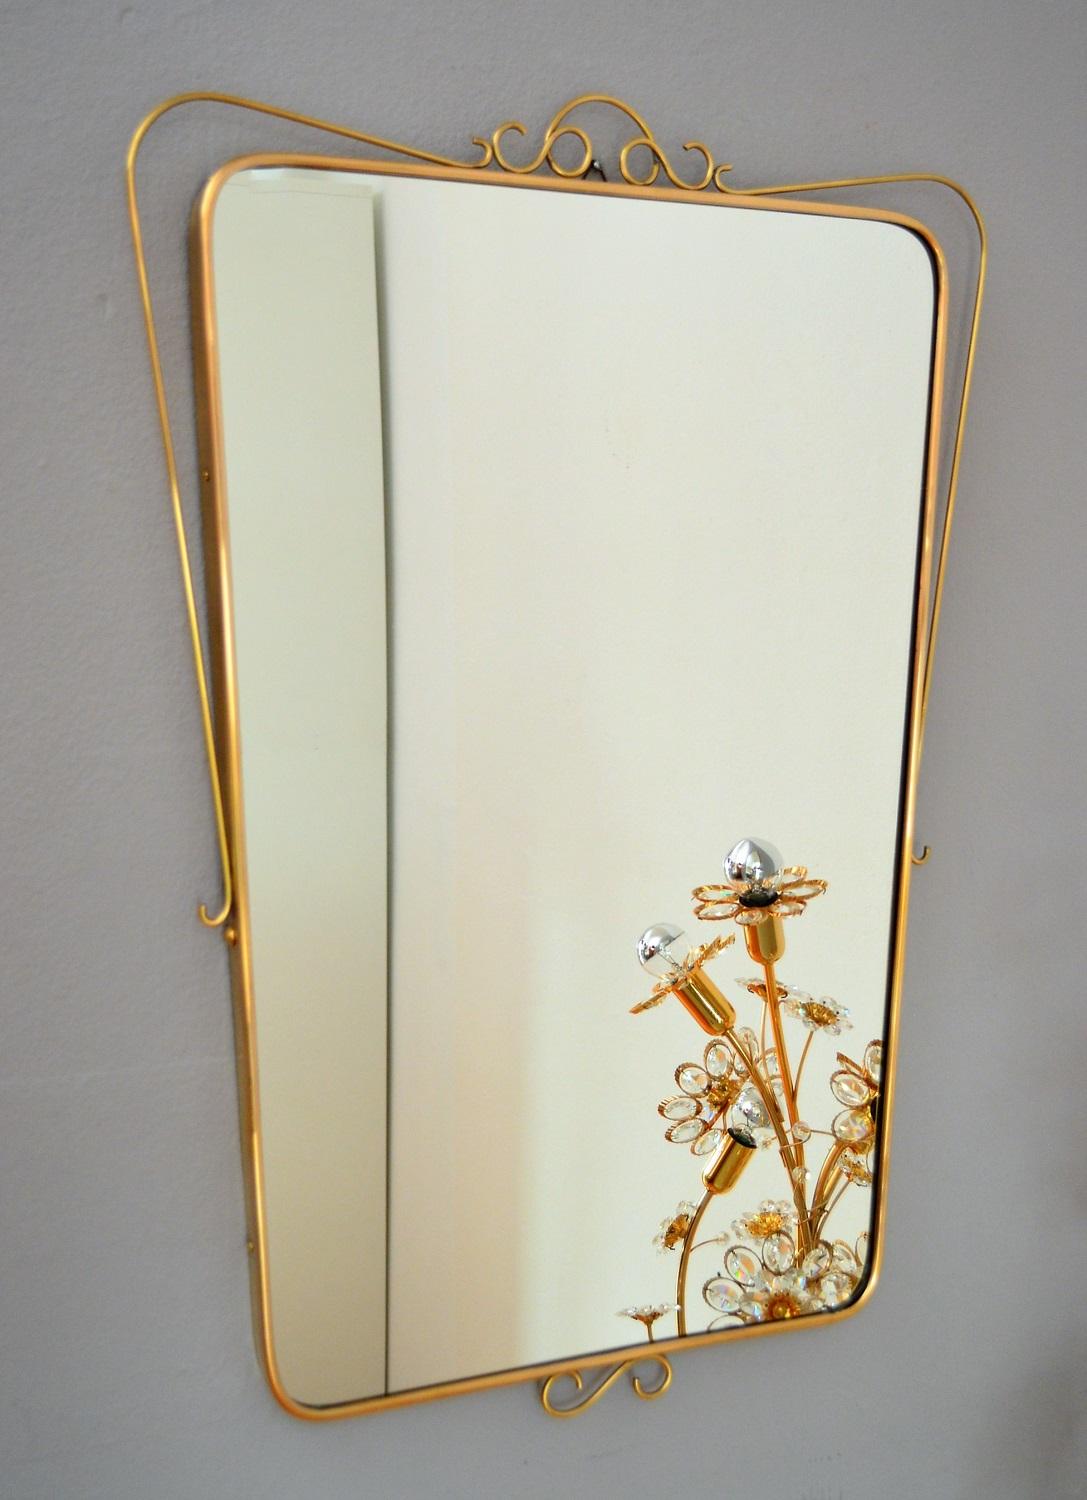 Beautiful and elegant wall mirror with brass frame and decorations.
Made in Italy in the 1950s.
The brass frame have been polished and the mirrored glass have been renewed, therefore the mirror is in mint condition.
Excellent overall condition